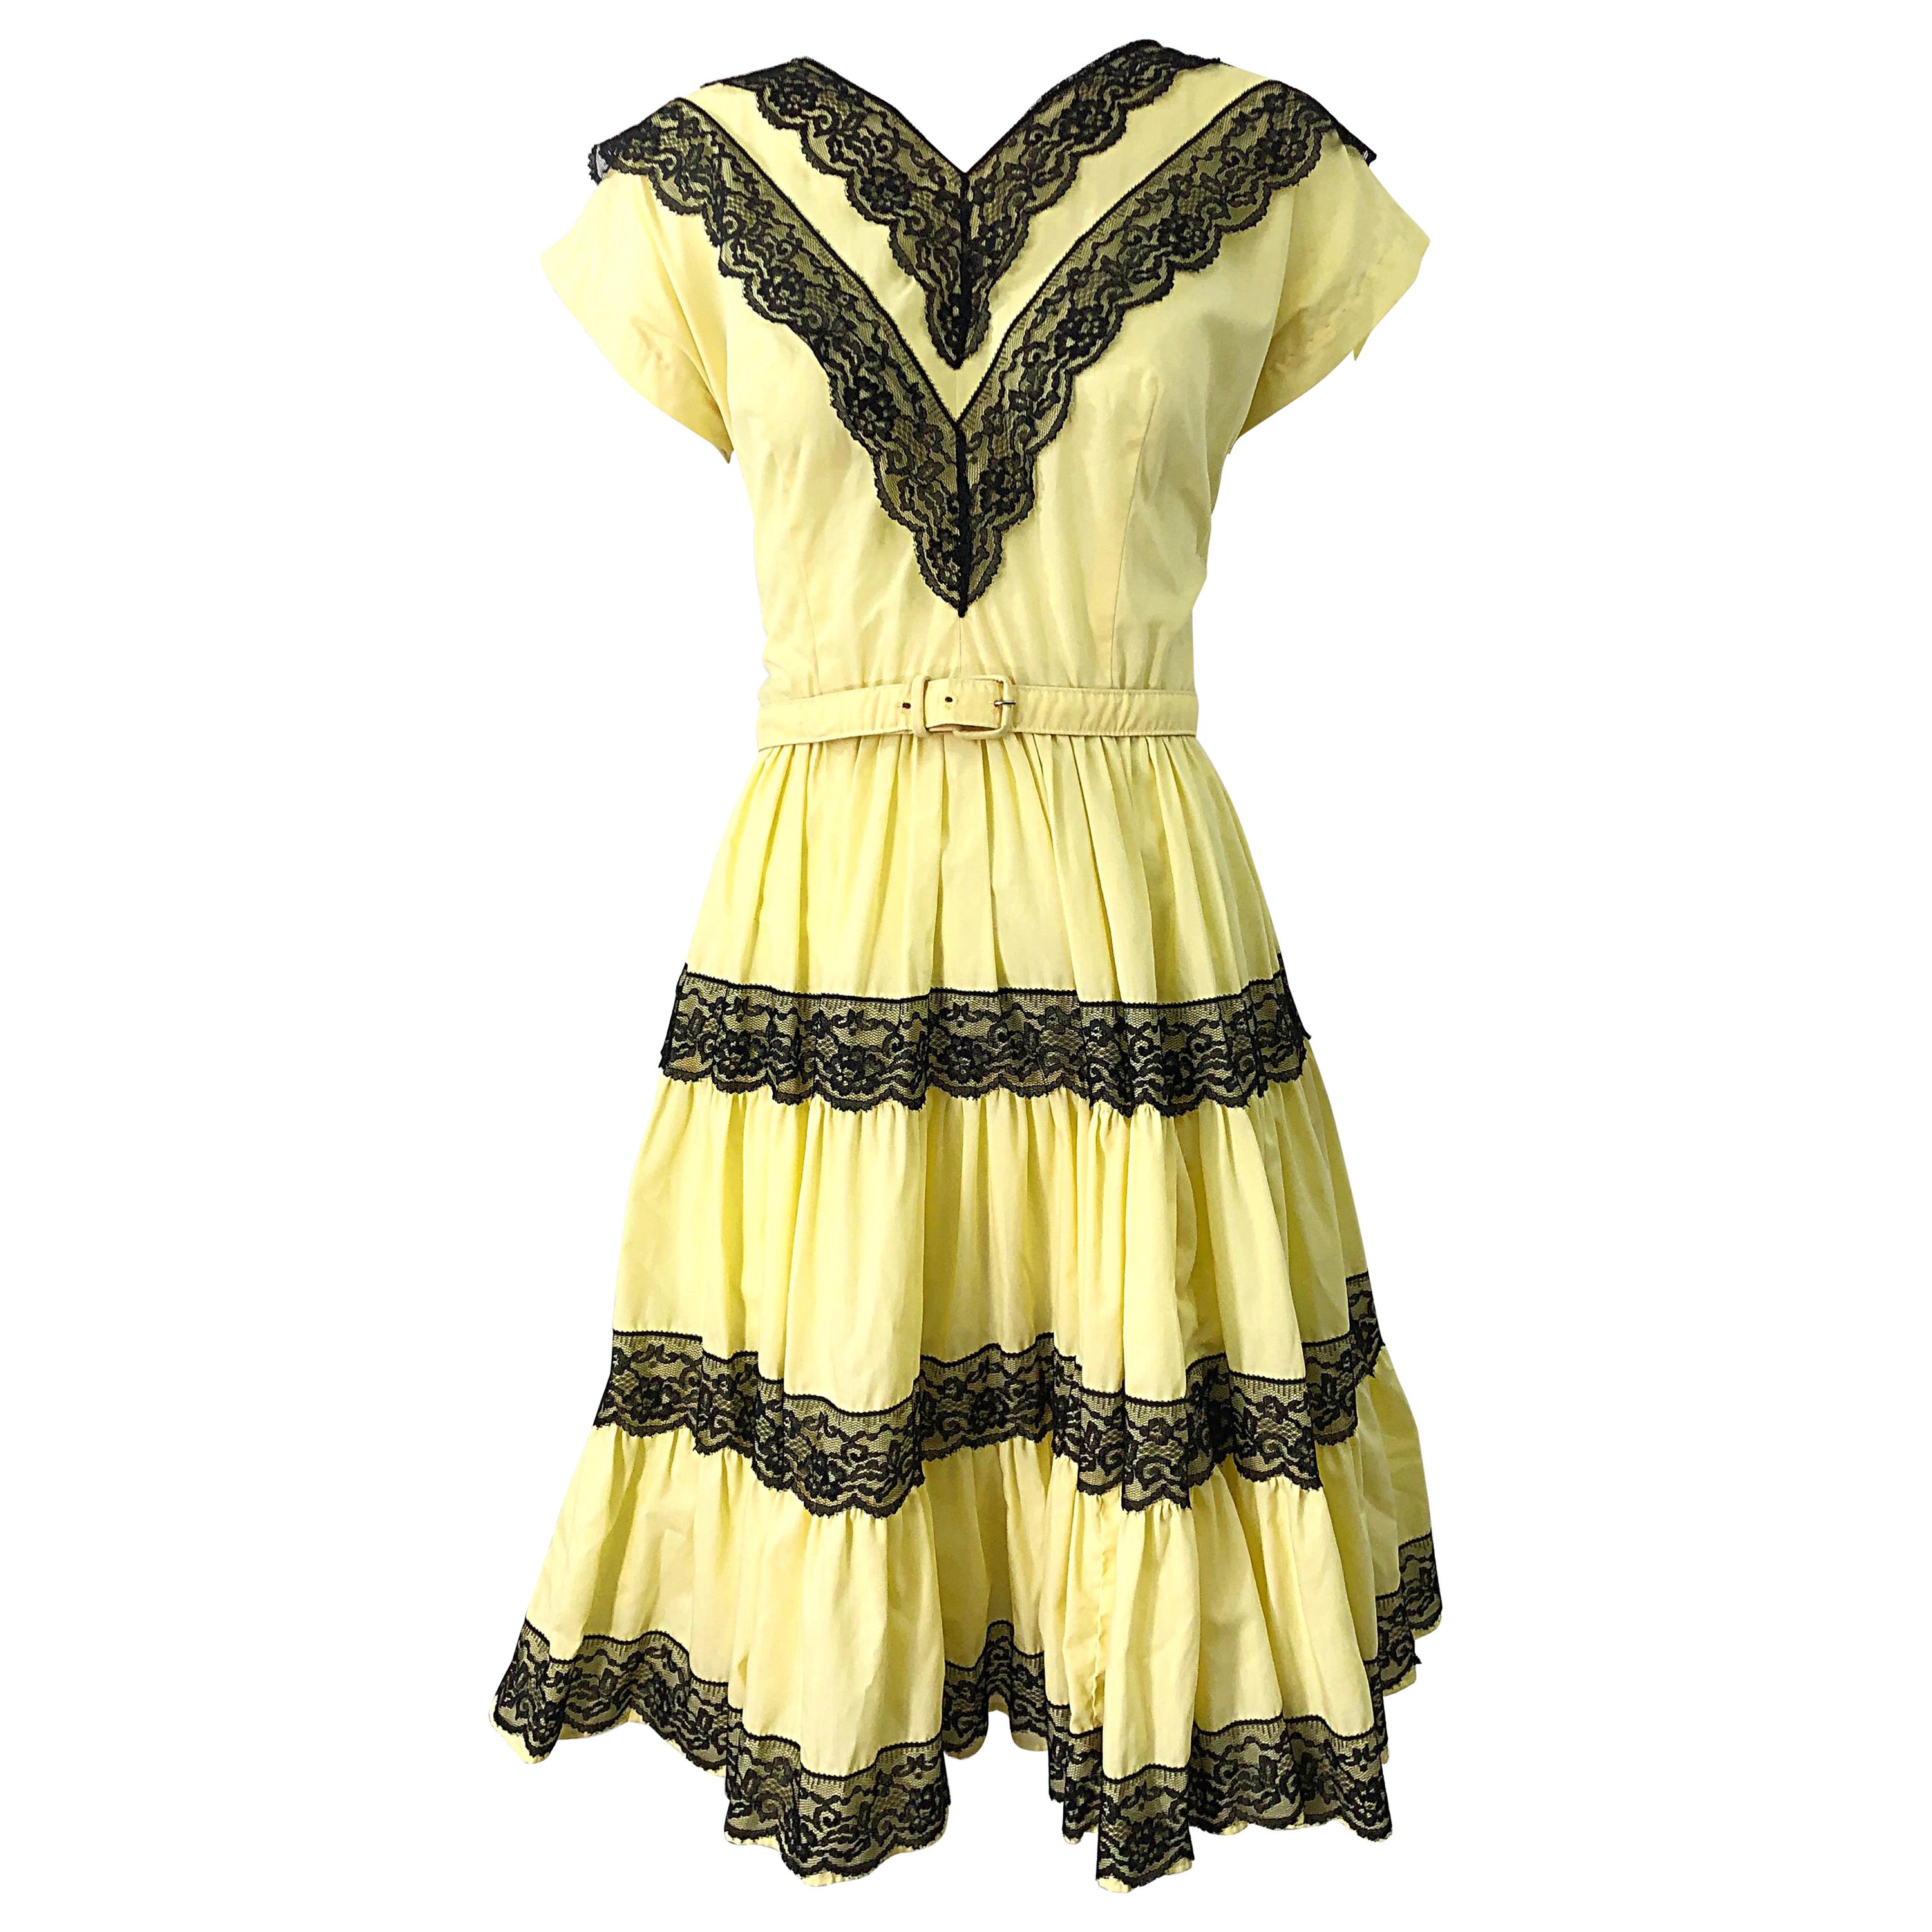 1950s Bettina of Miami Yellow + Black Cotton Lace Fit n' Flare Vintage 50s Dress For Sale